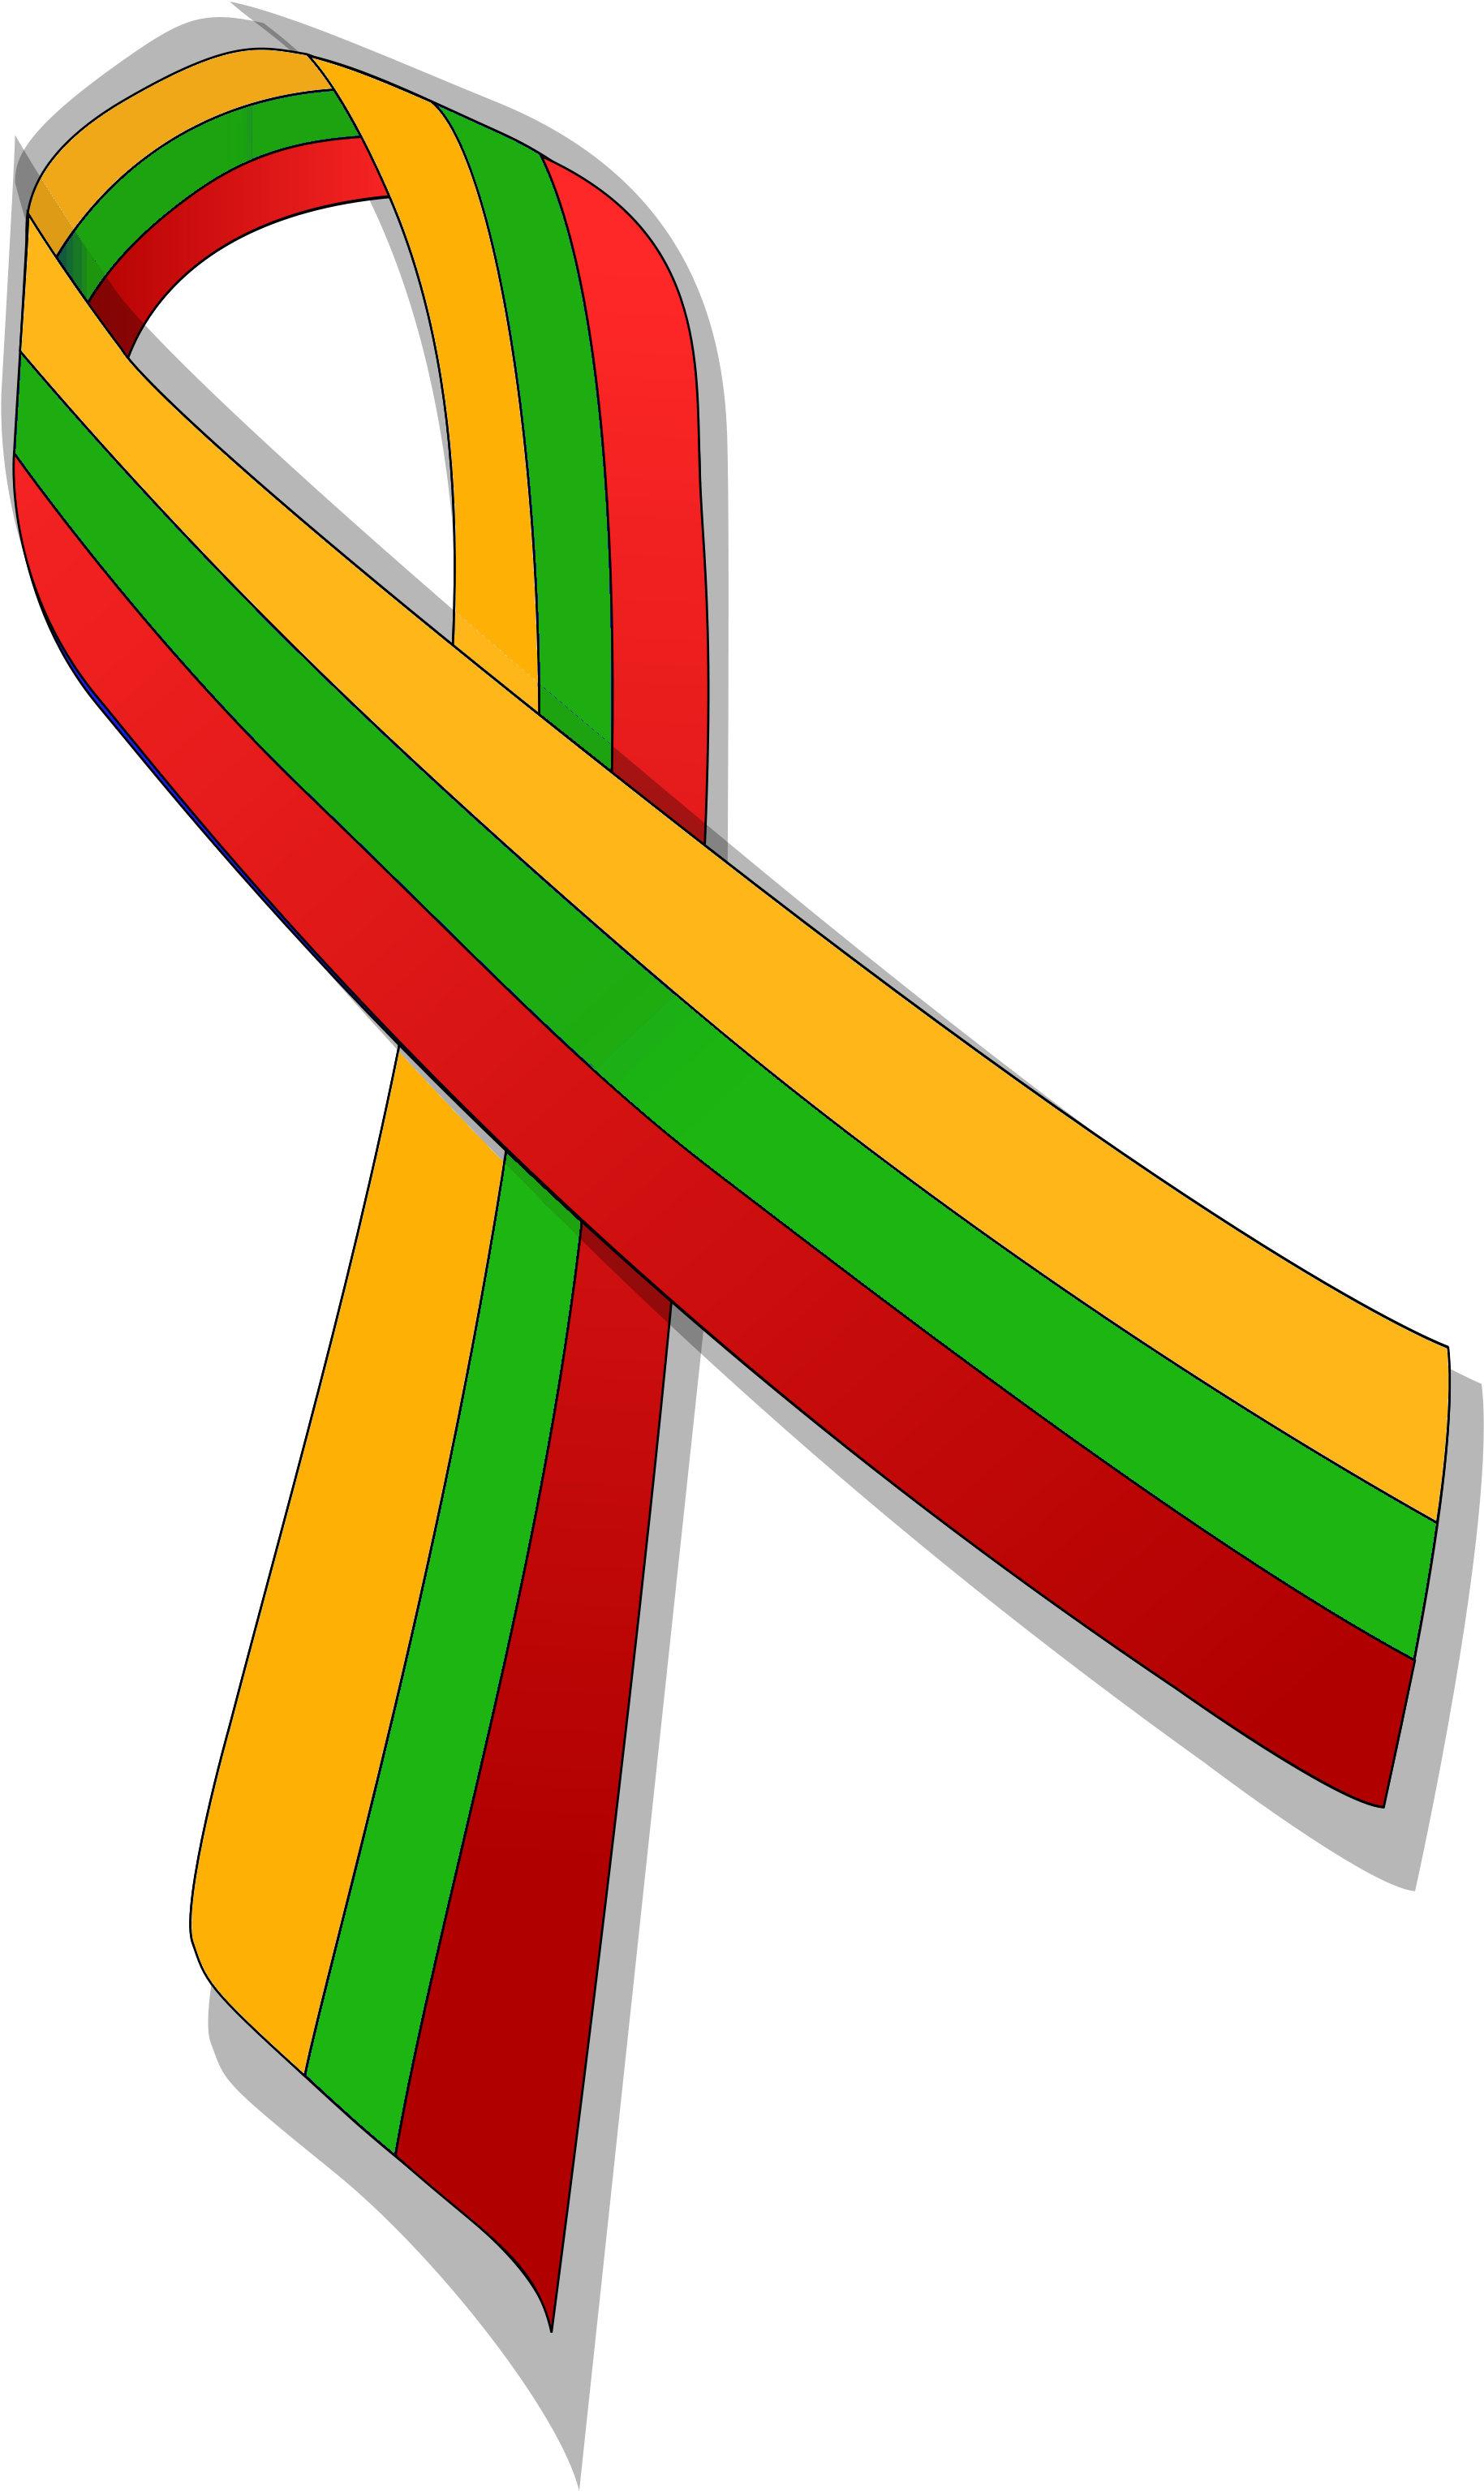 A Colorful Ribbon On A Black Background